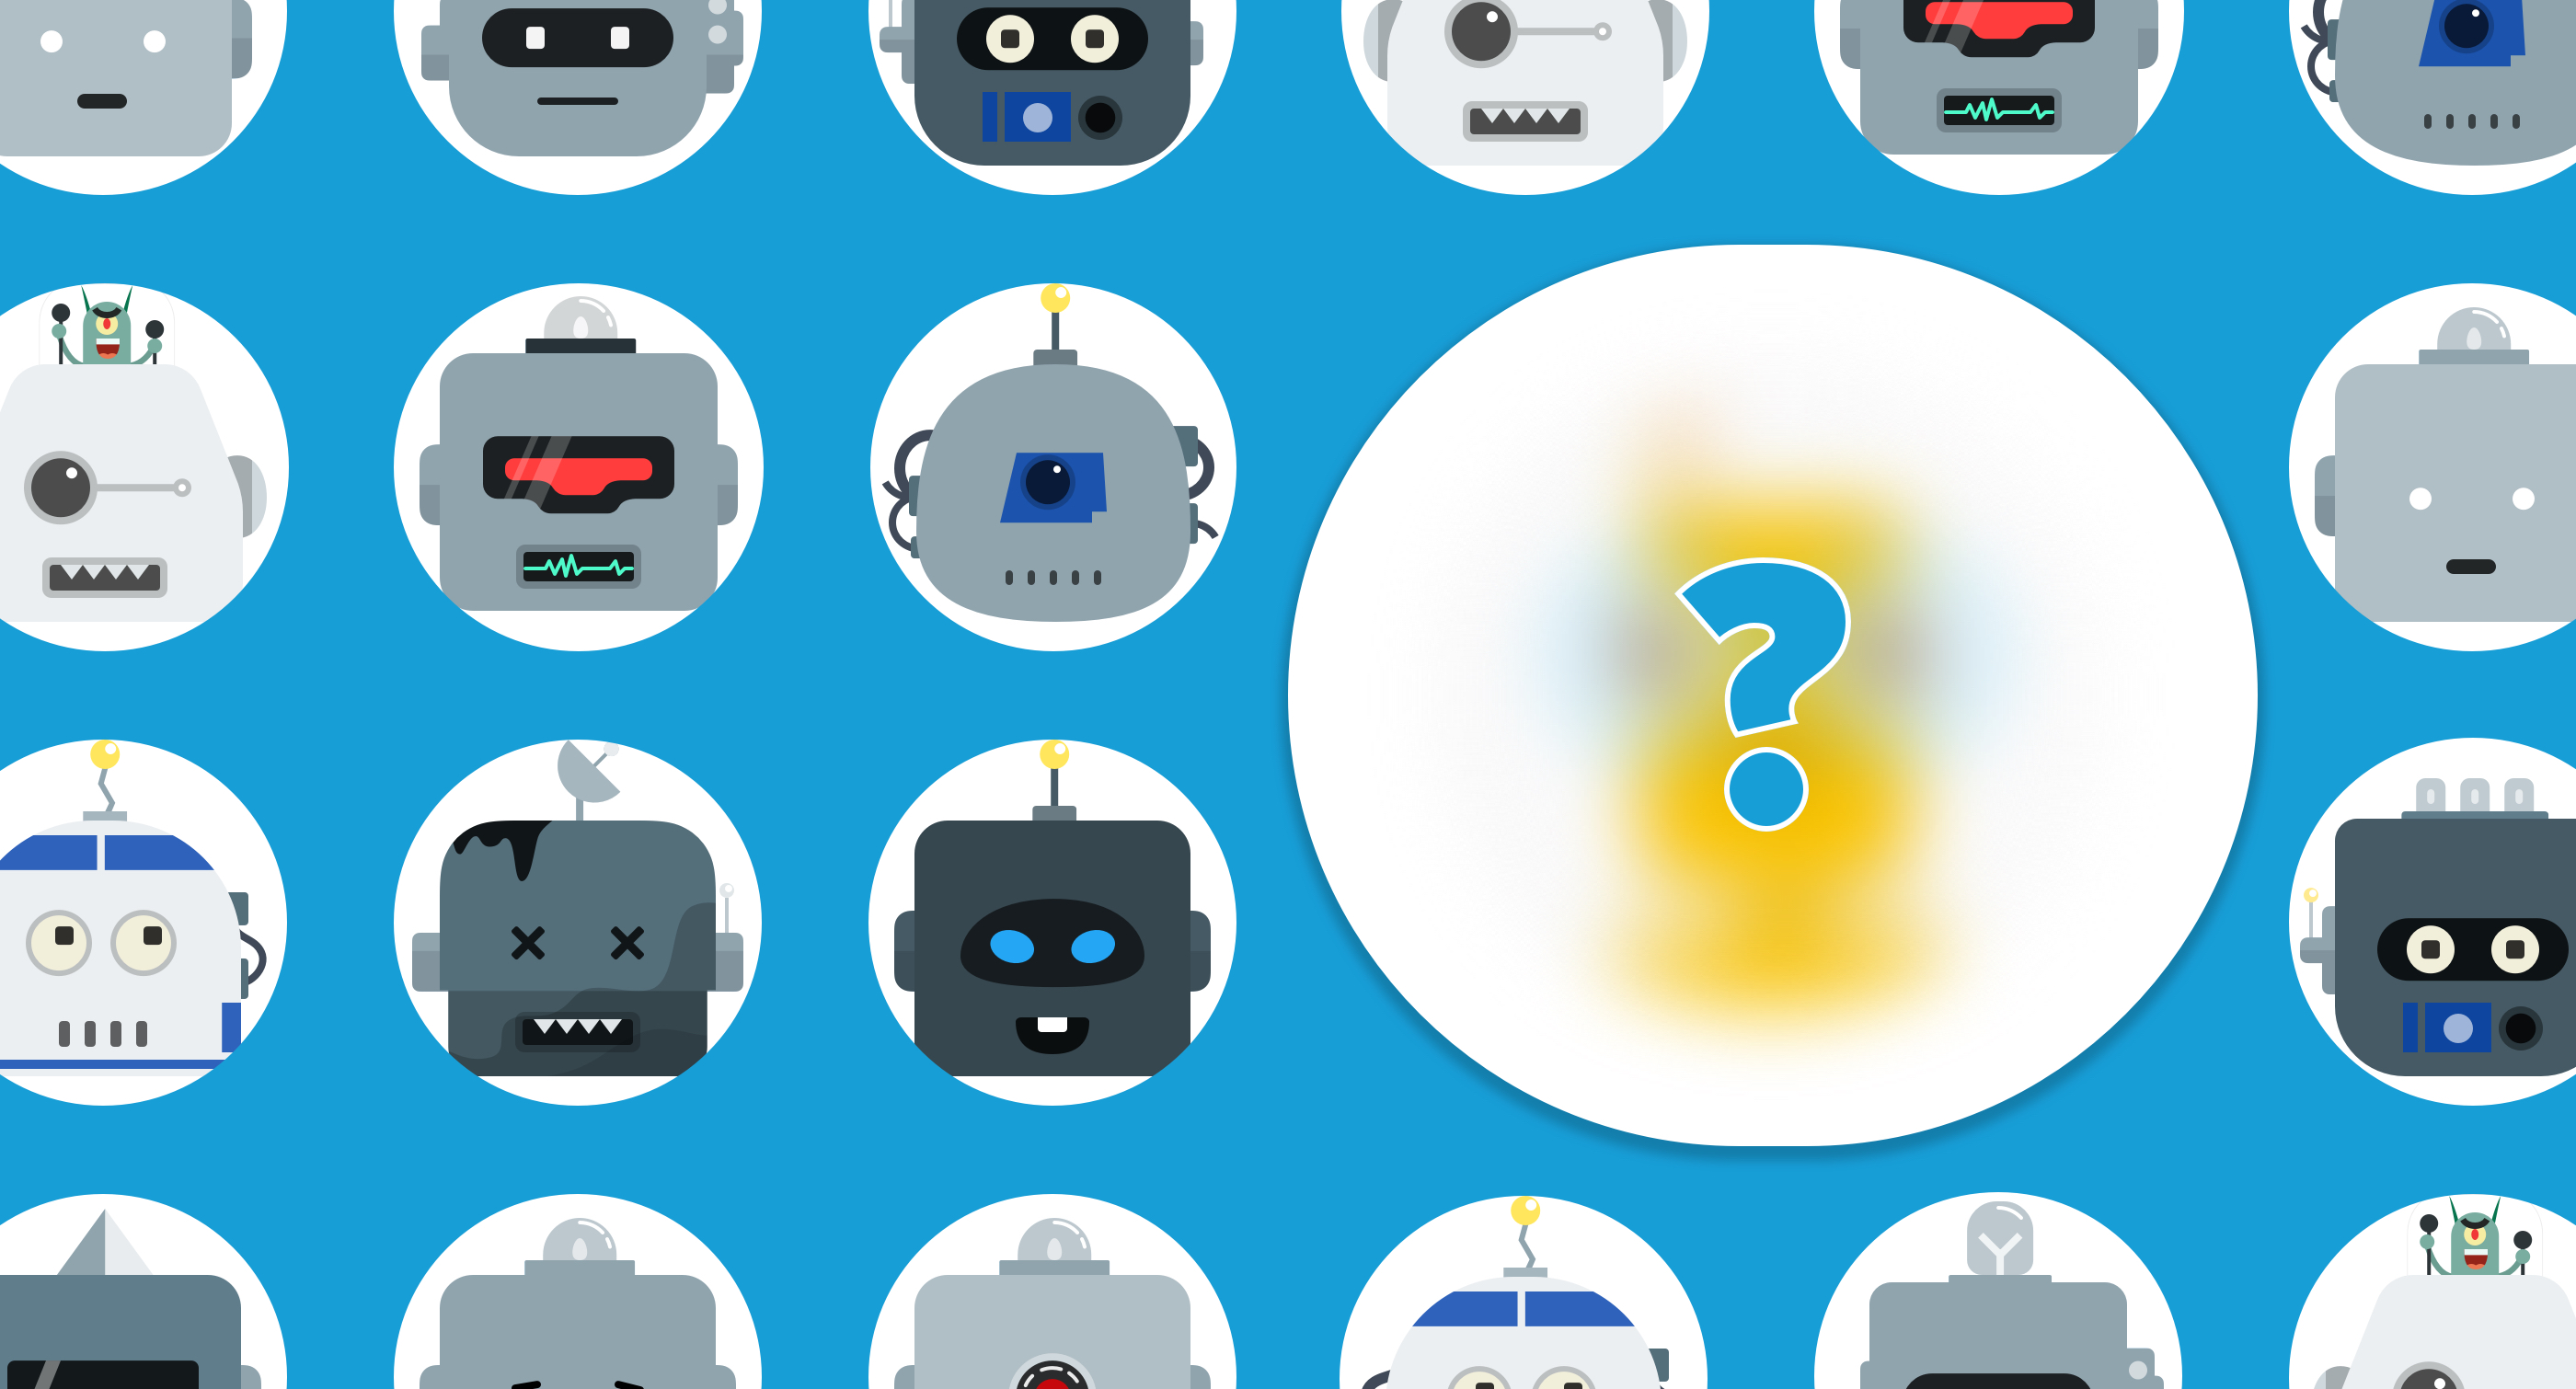 profile pictures of several robots. The biggest one, yet to be revealed